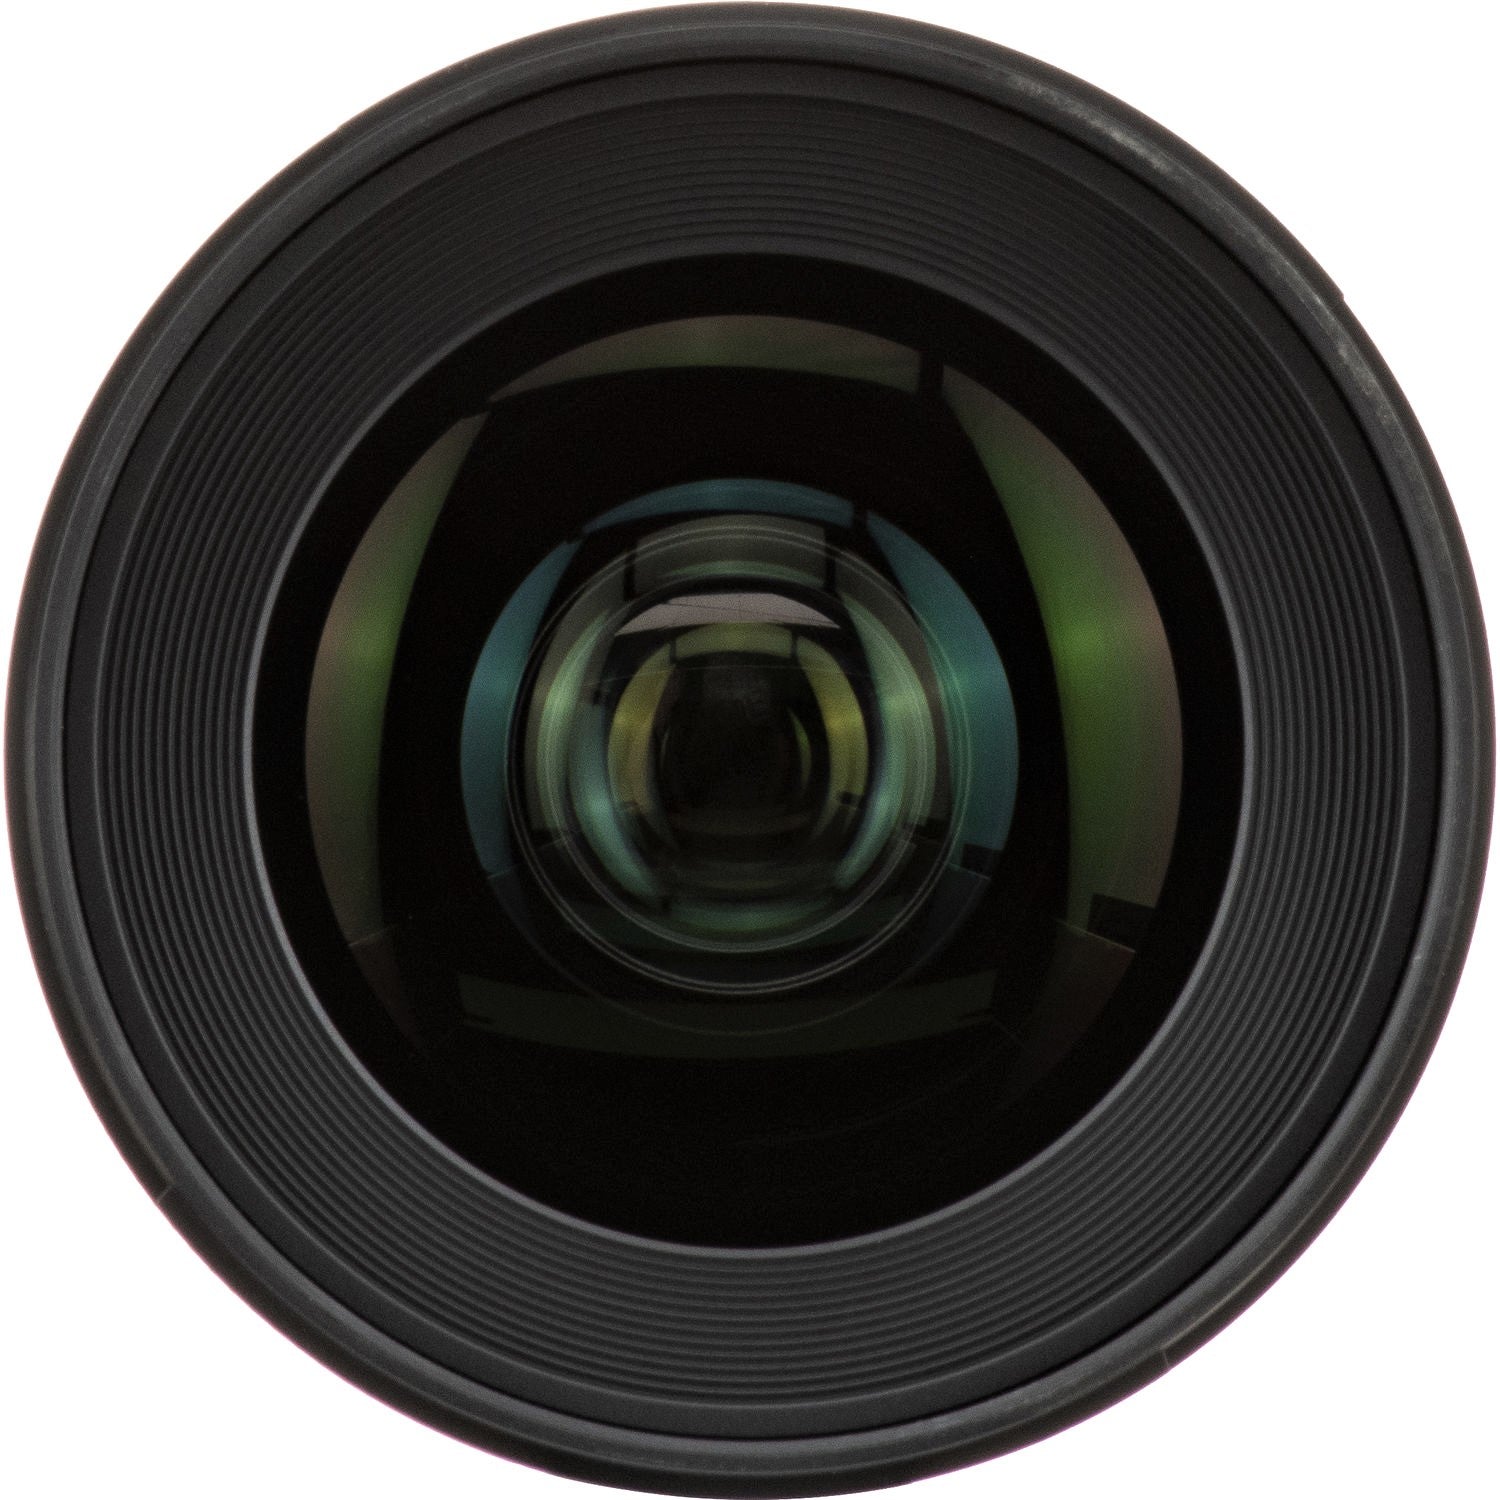 Sigma 28mm F1.4 DG HSM Art Lens for Nikon F in a Front Close-Up View